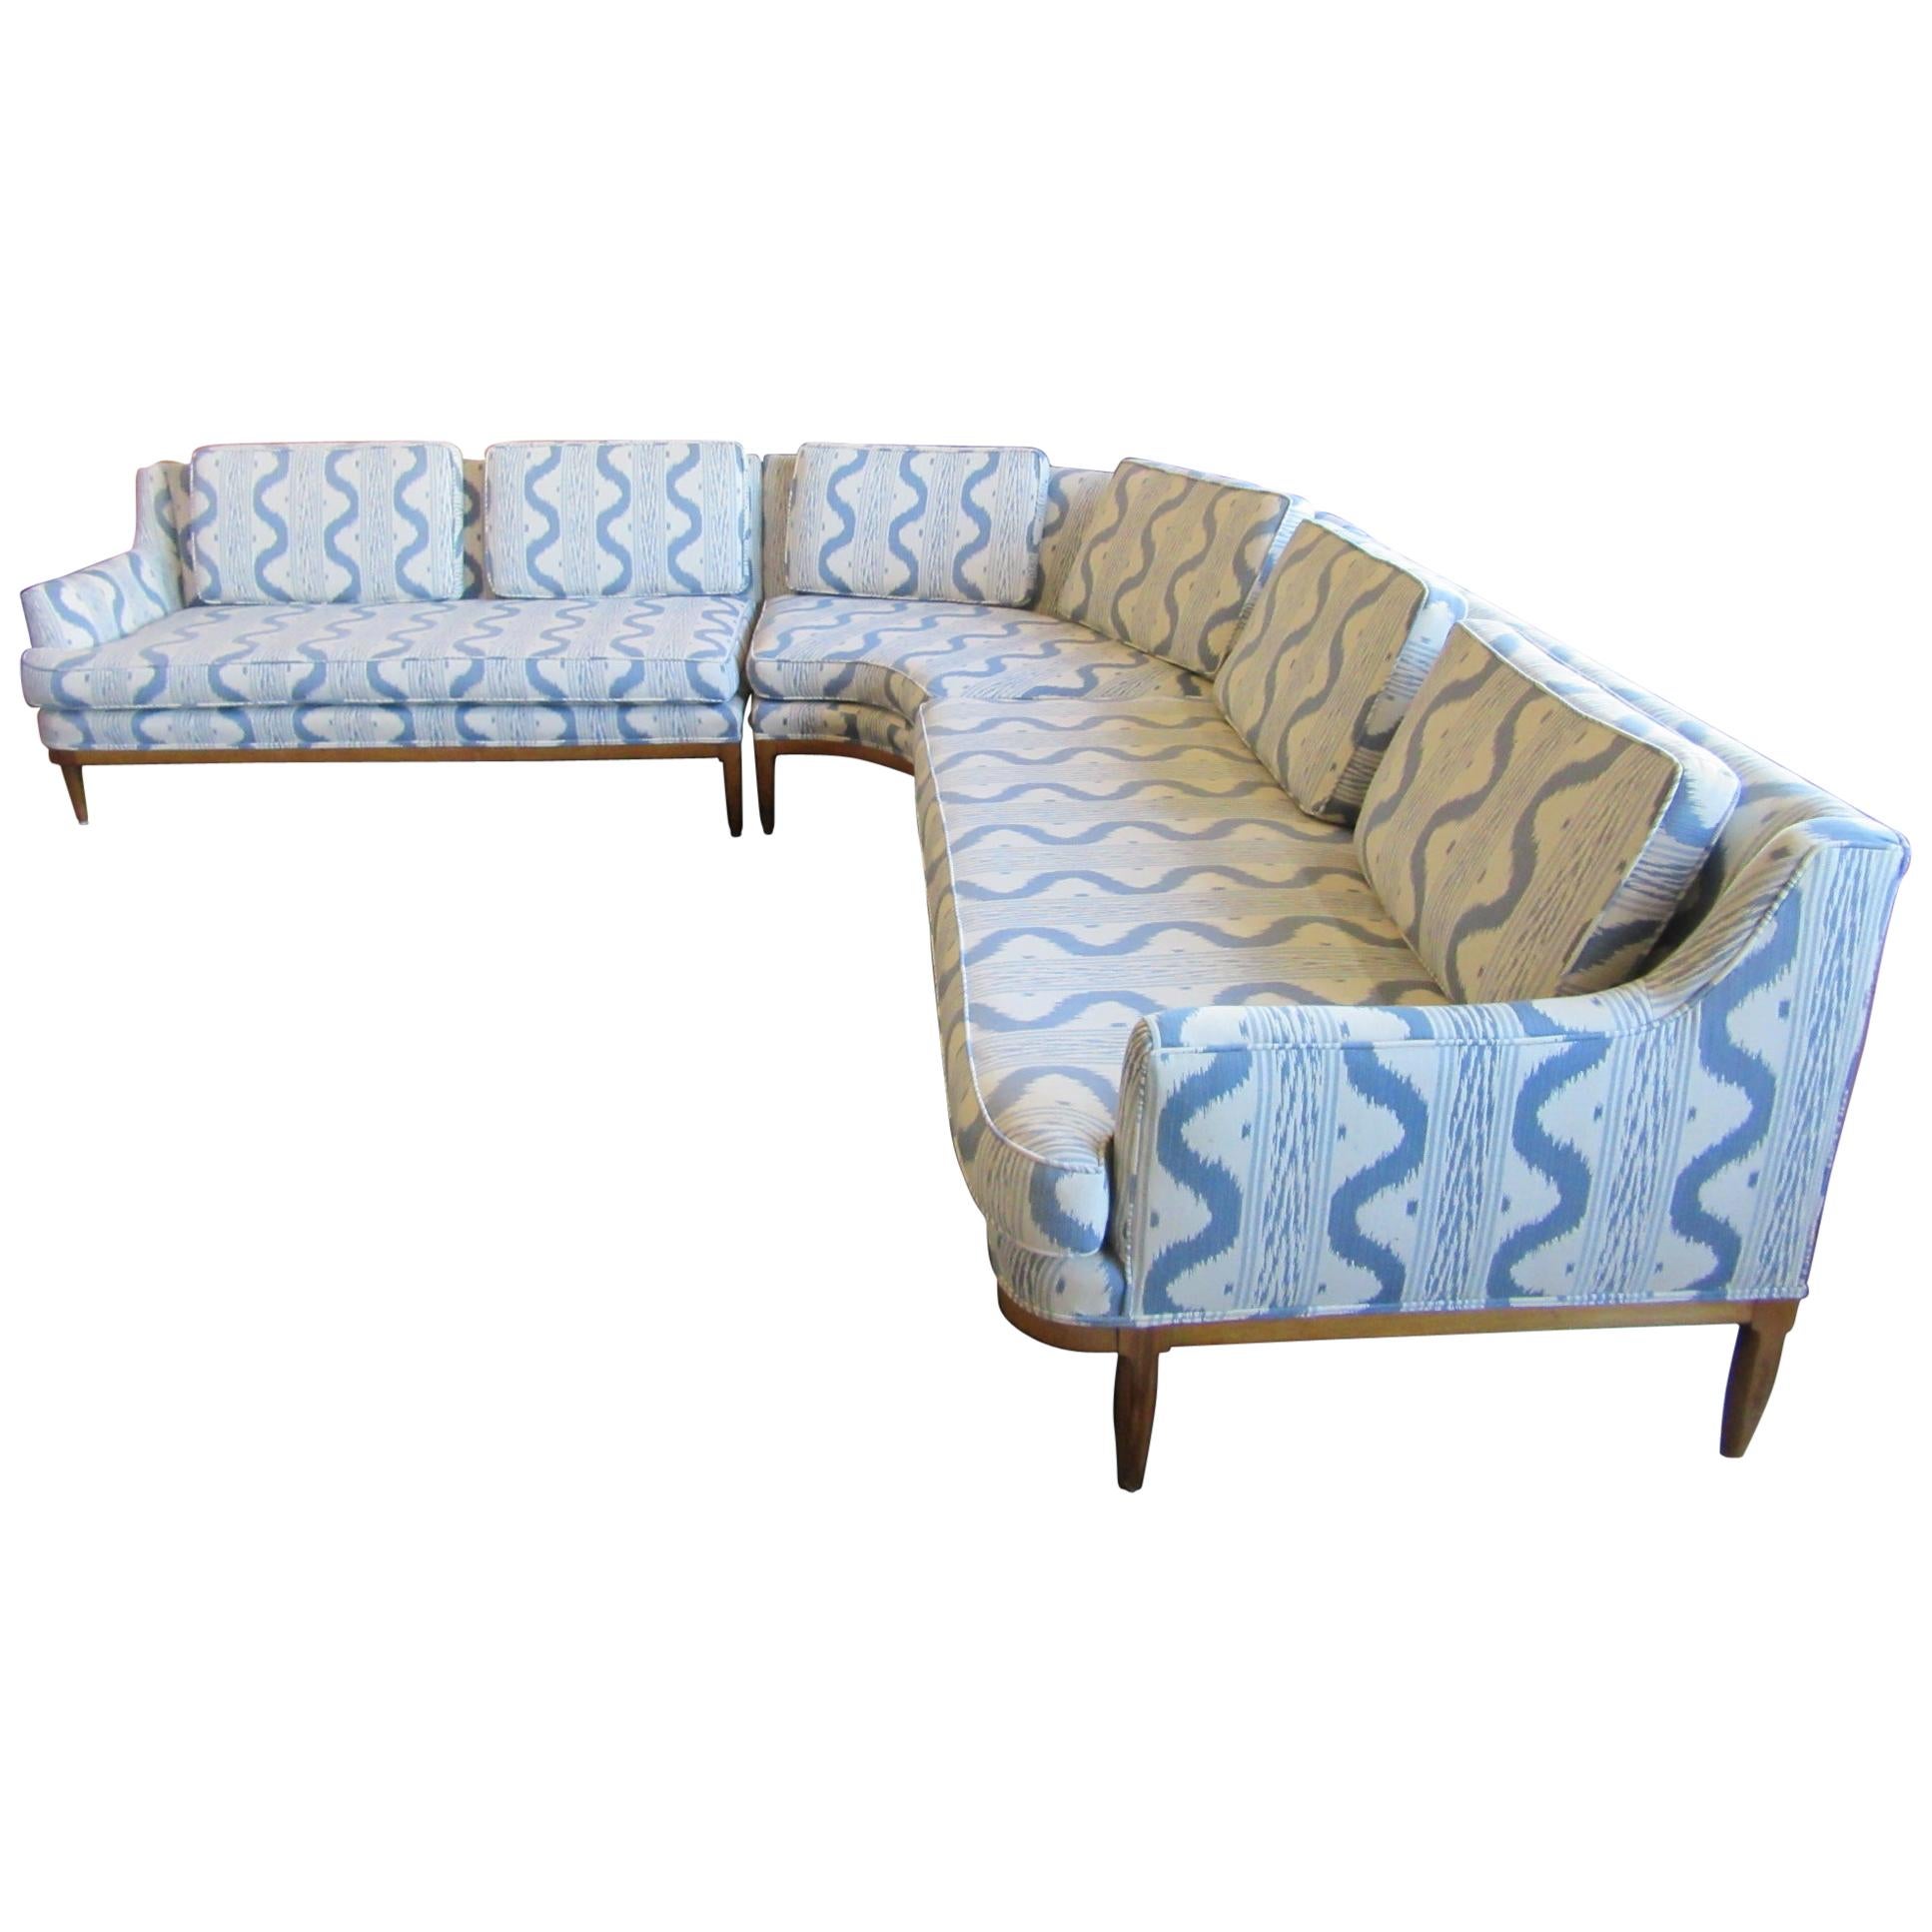 Mid Century Sectional Sofa in the style of Widdicomb Fabric by Pierre Frey